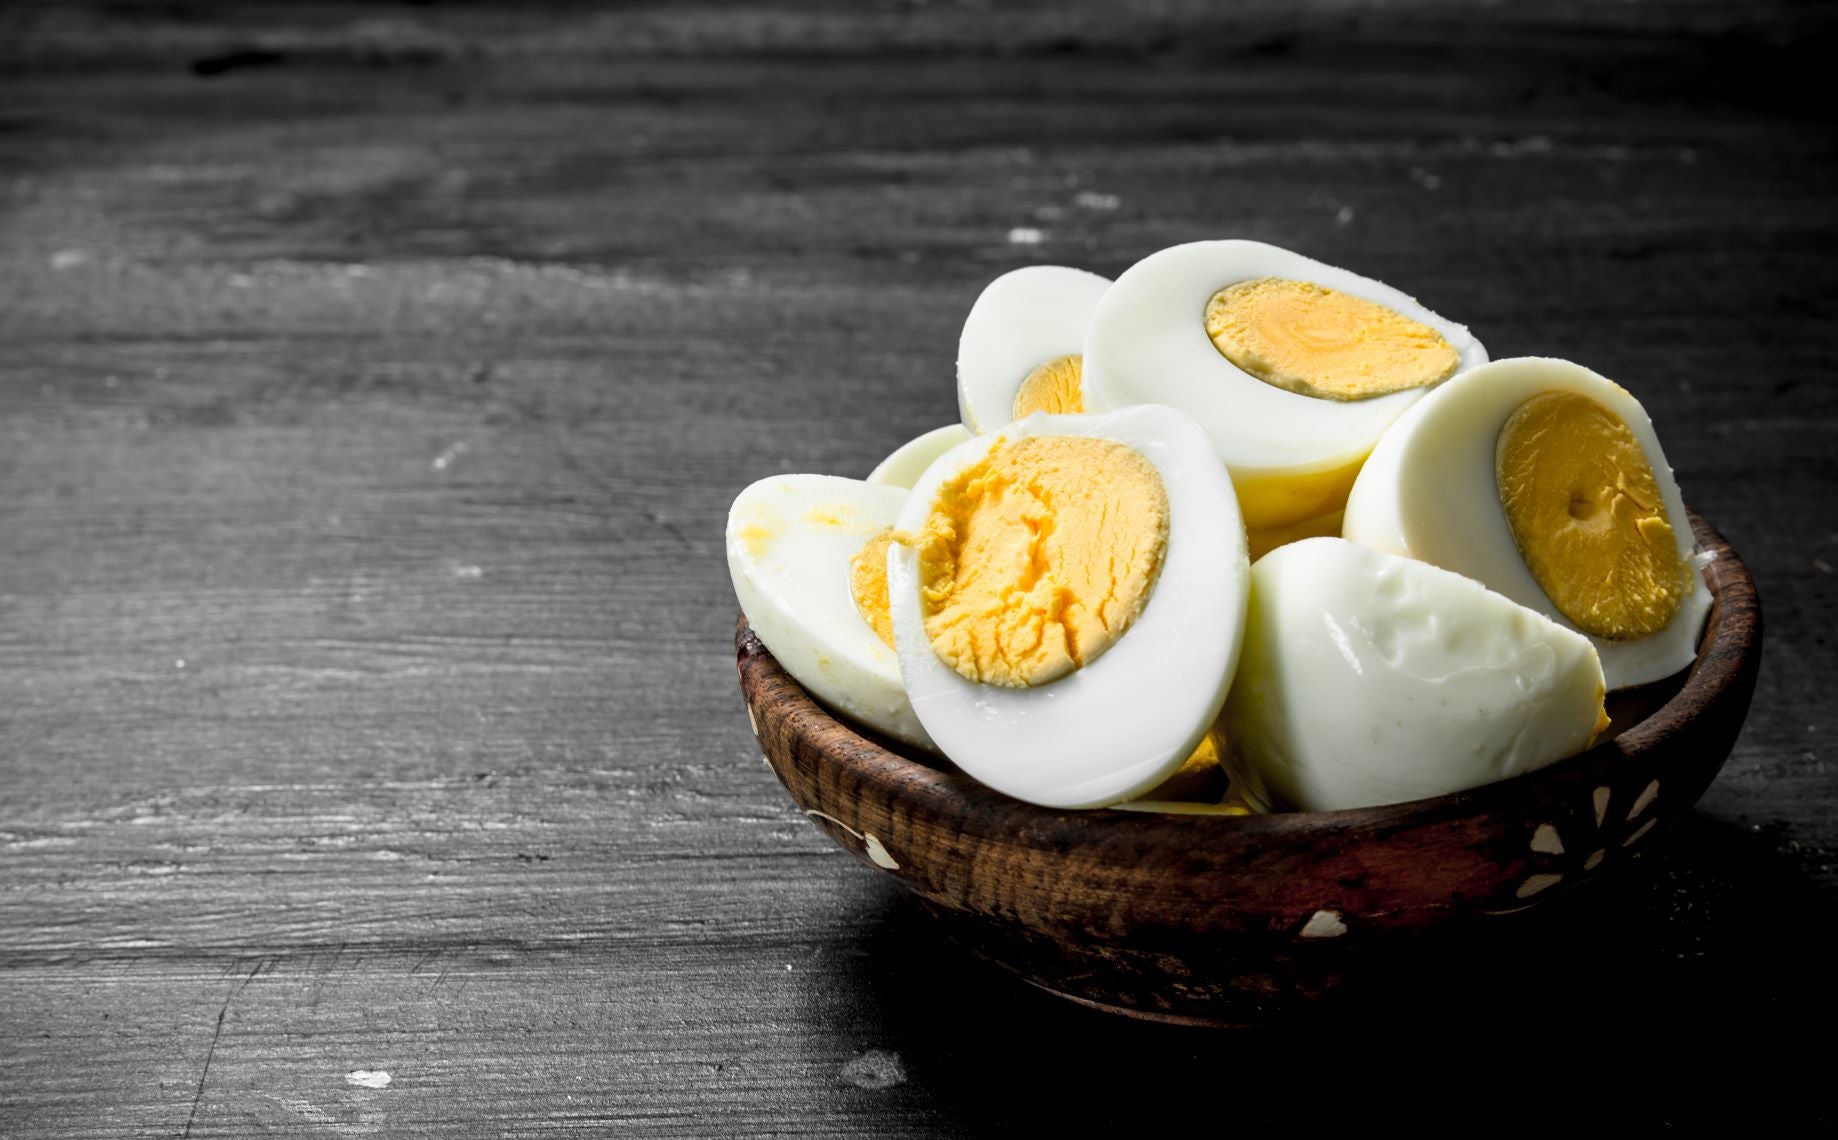 A wooden bowl with sliced boiled eggs for babies. Eggs are a great healthy food option for babies.